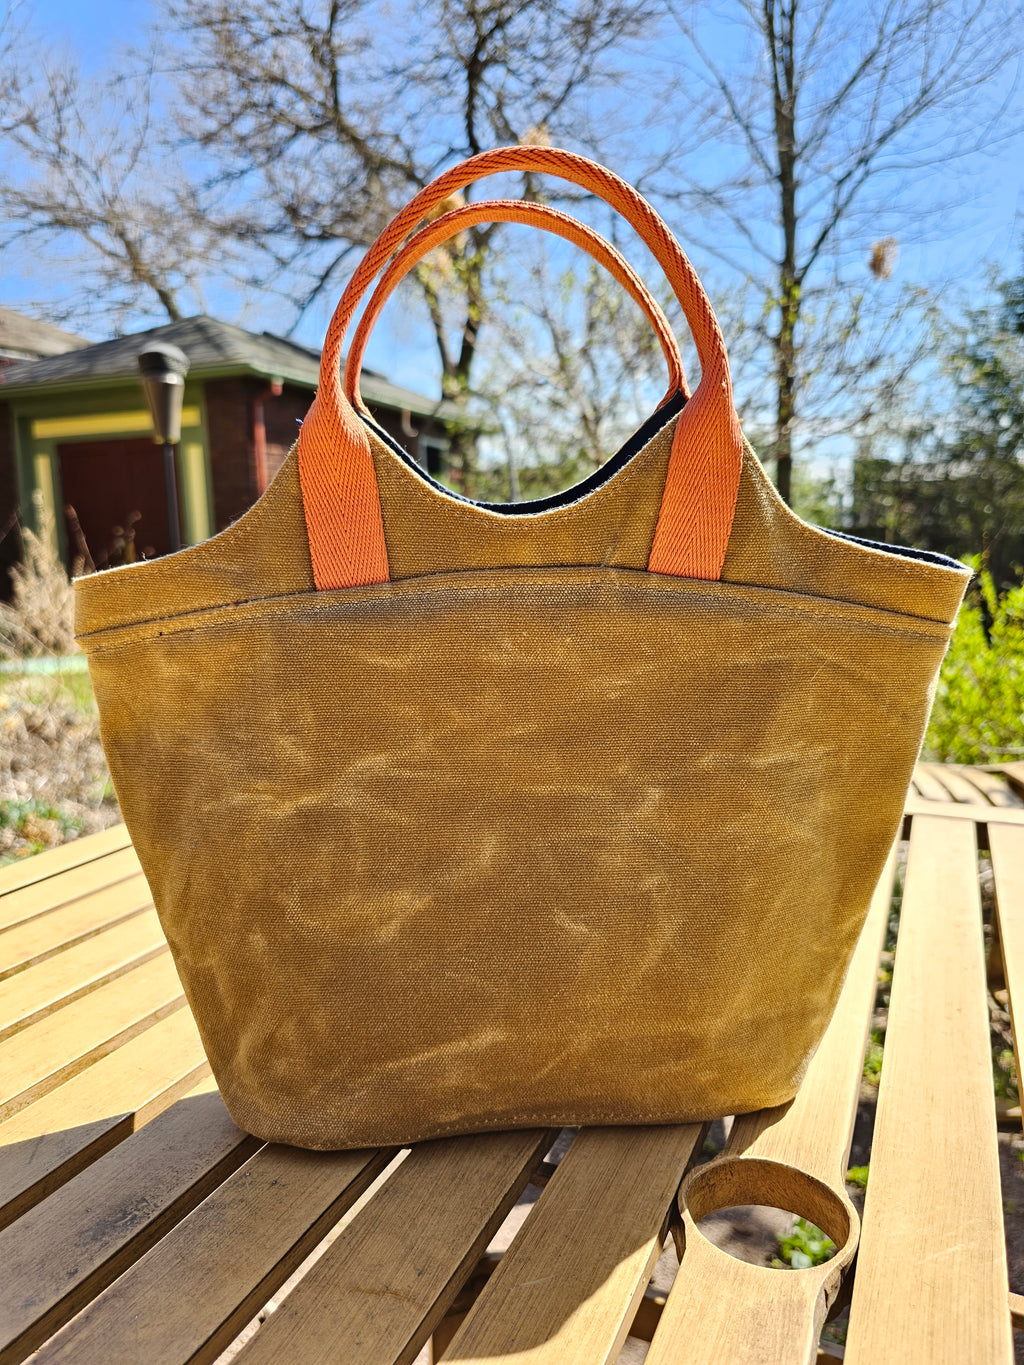 Three Sisters Insulated Tote - Brown with Orange Handles